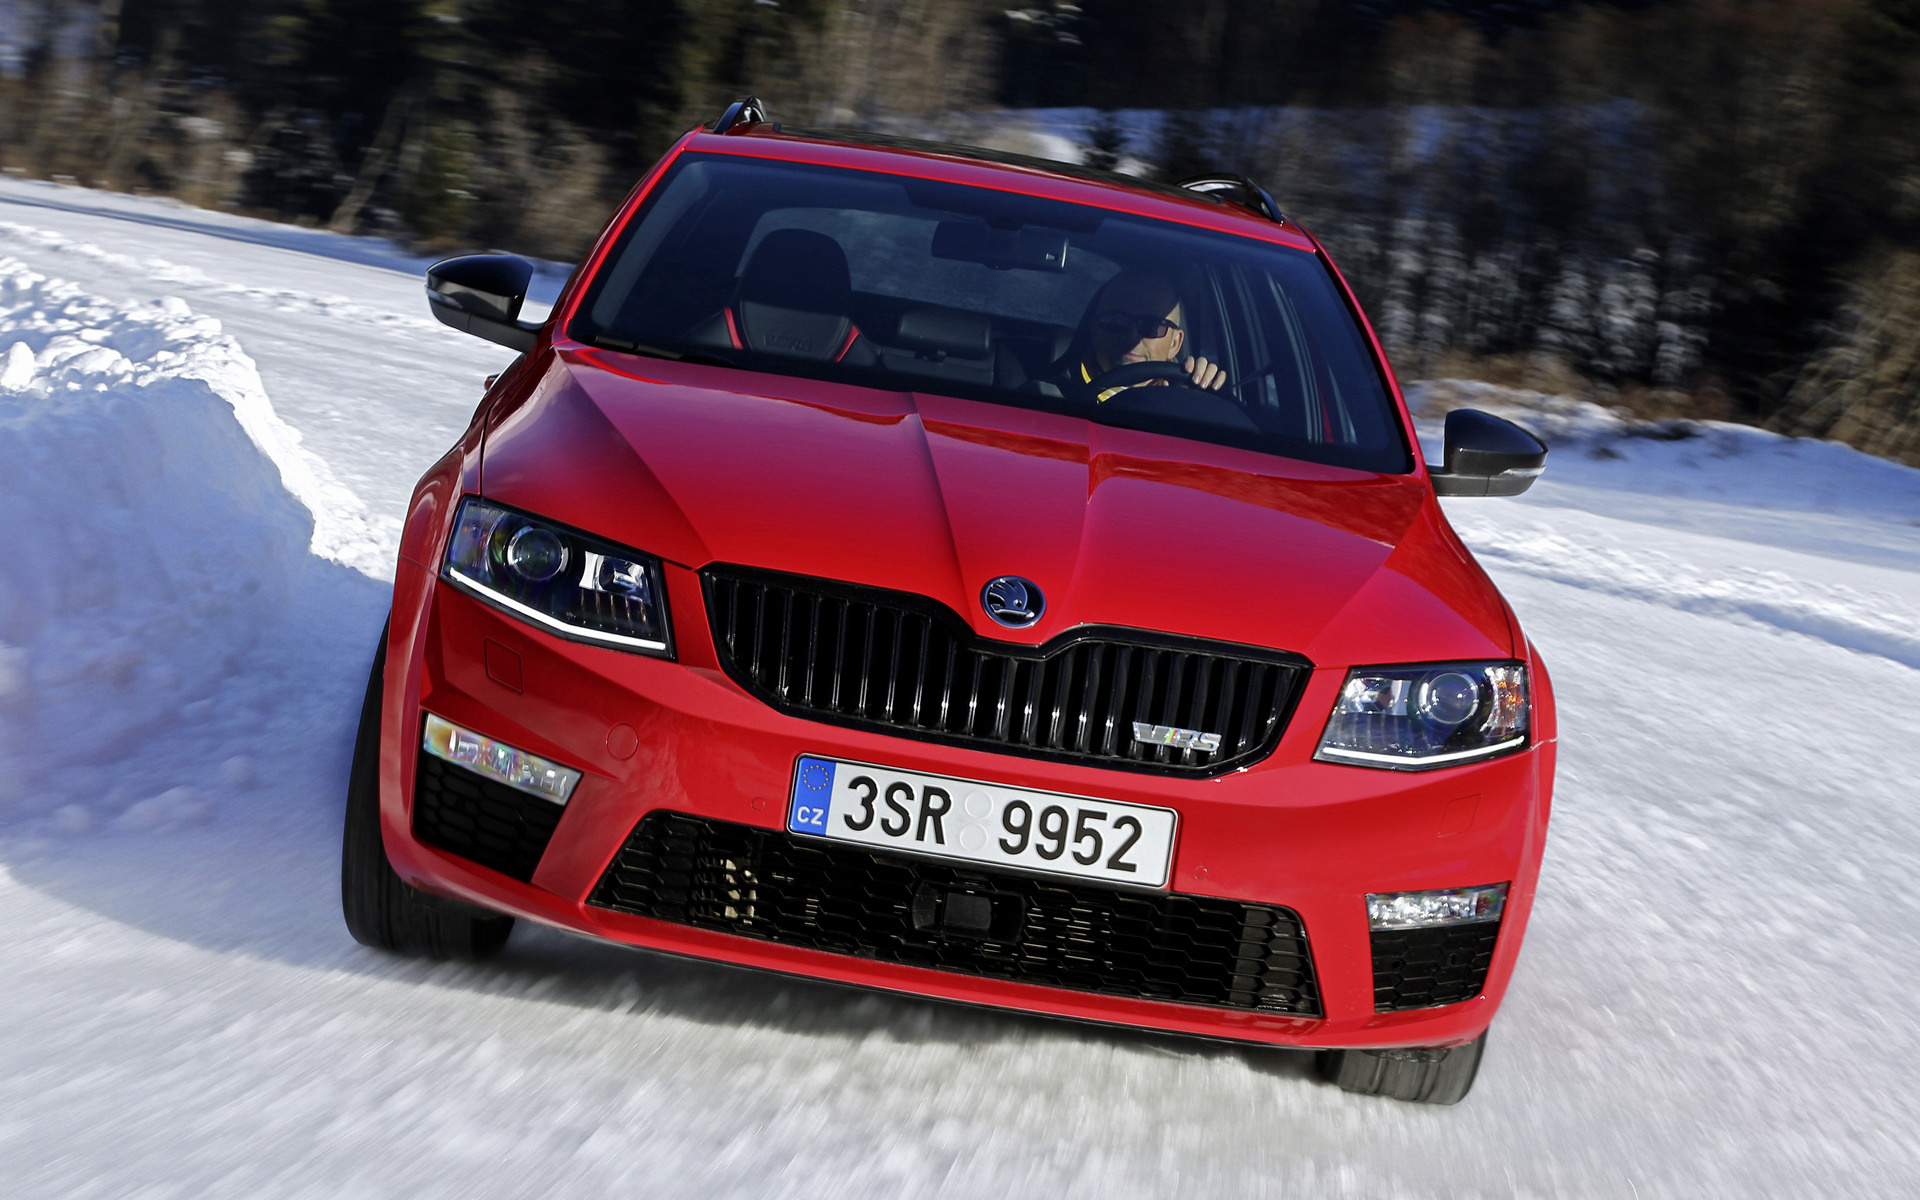 2013 Skoda Octavia RS Combi - Wallpapers and HD Images